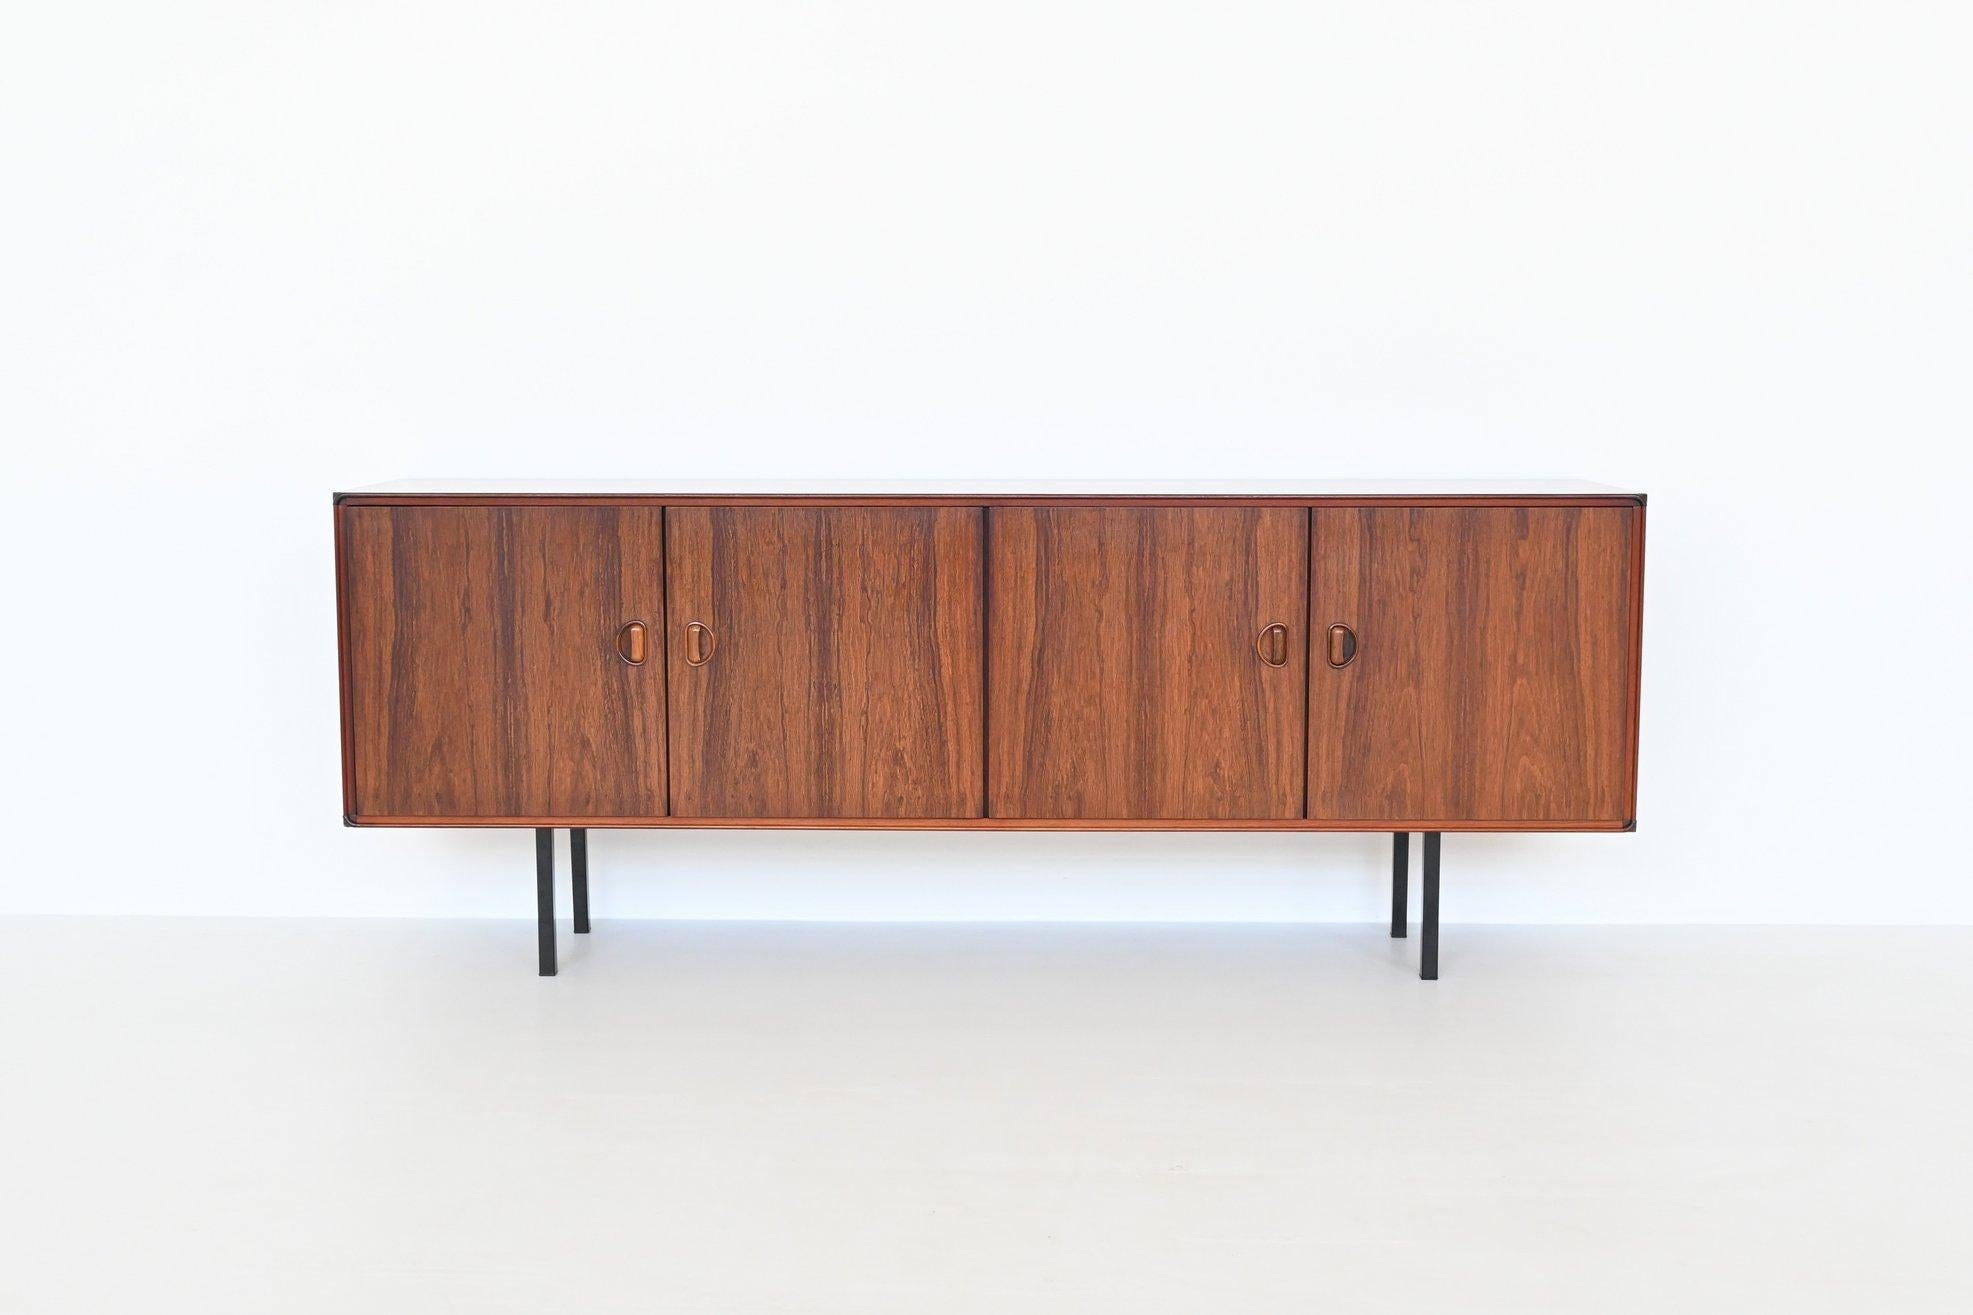 Beautiful refined quality symmetric sideboard manufactured by Fristho Franeker, The Netherlands 1960. This sideboard is made of nicely grained rosewood veneer supported by four metal feet. It has four doors with two large shelves behind. Nicely